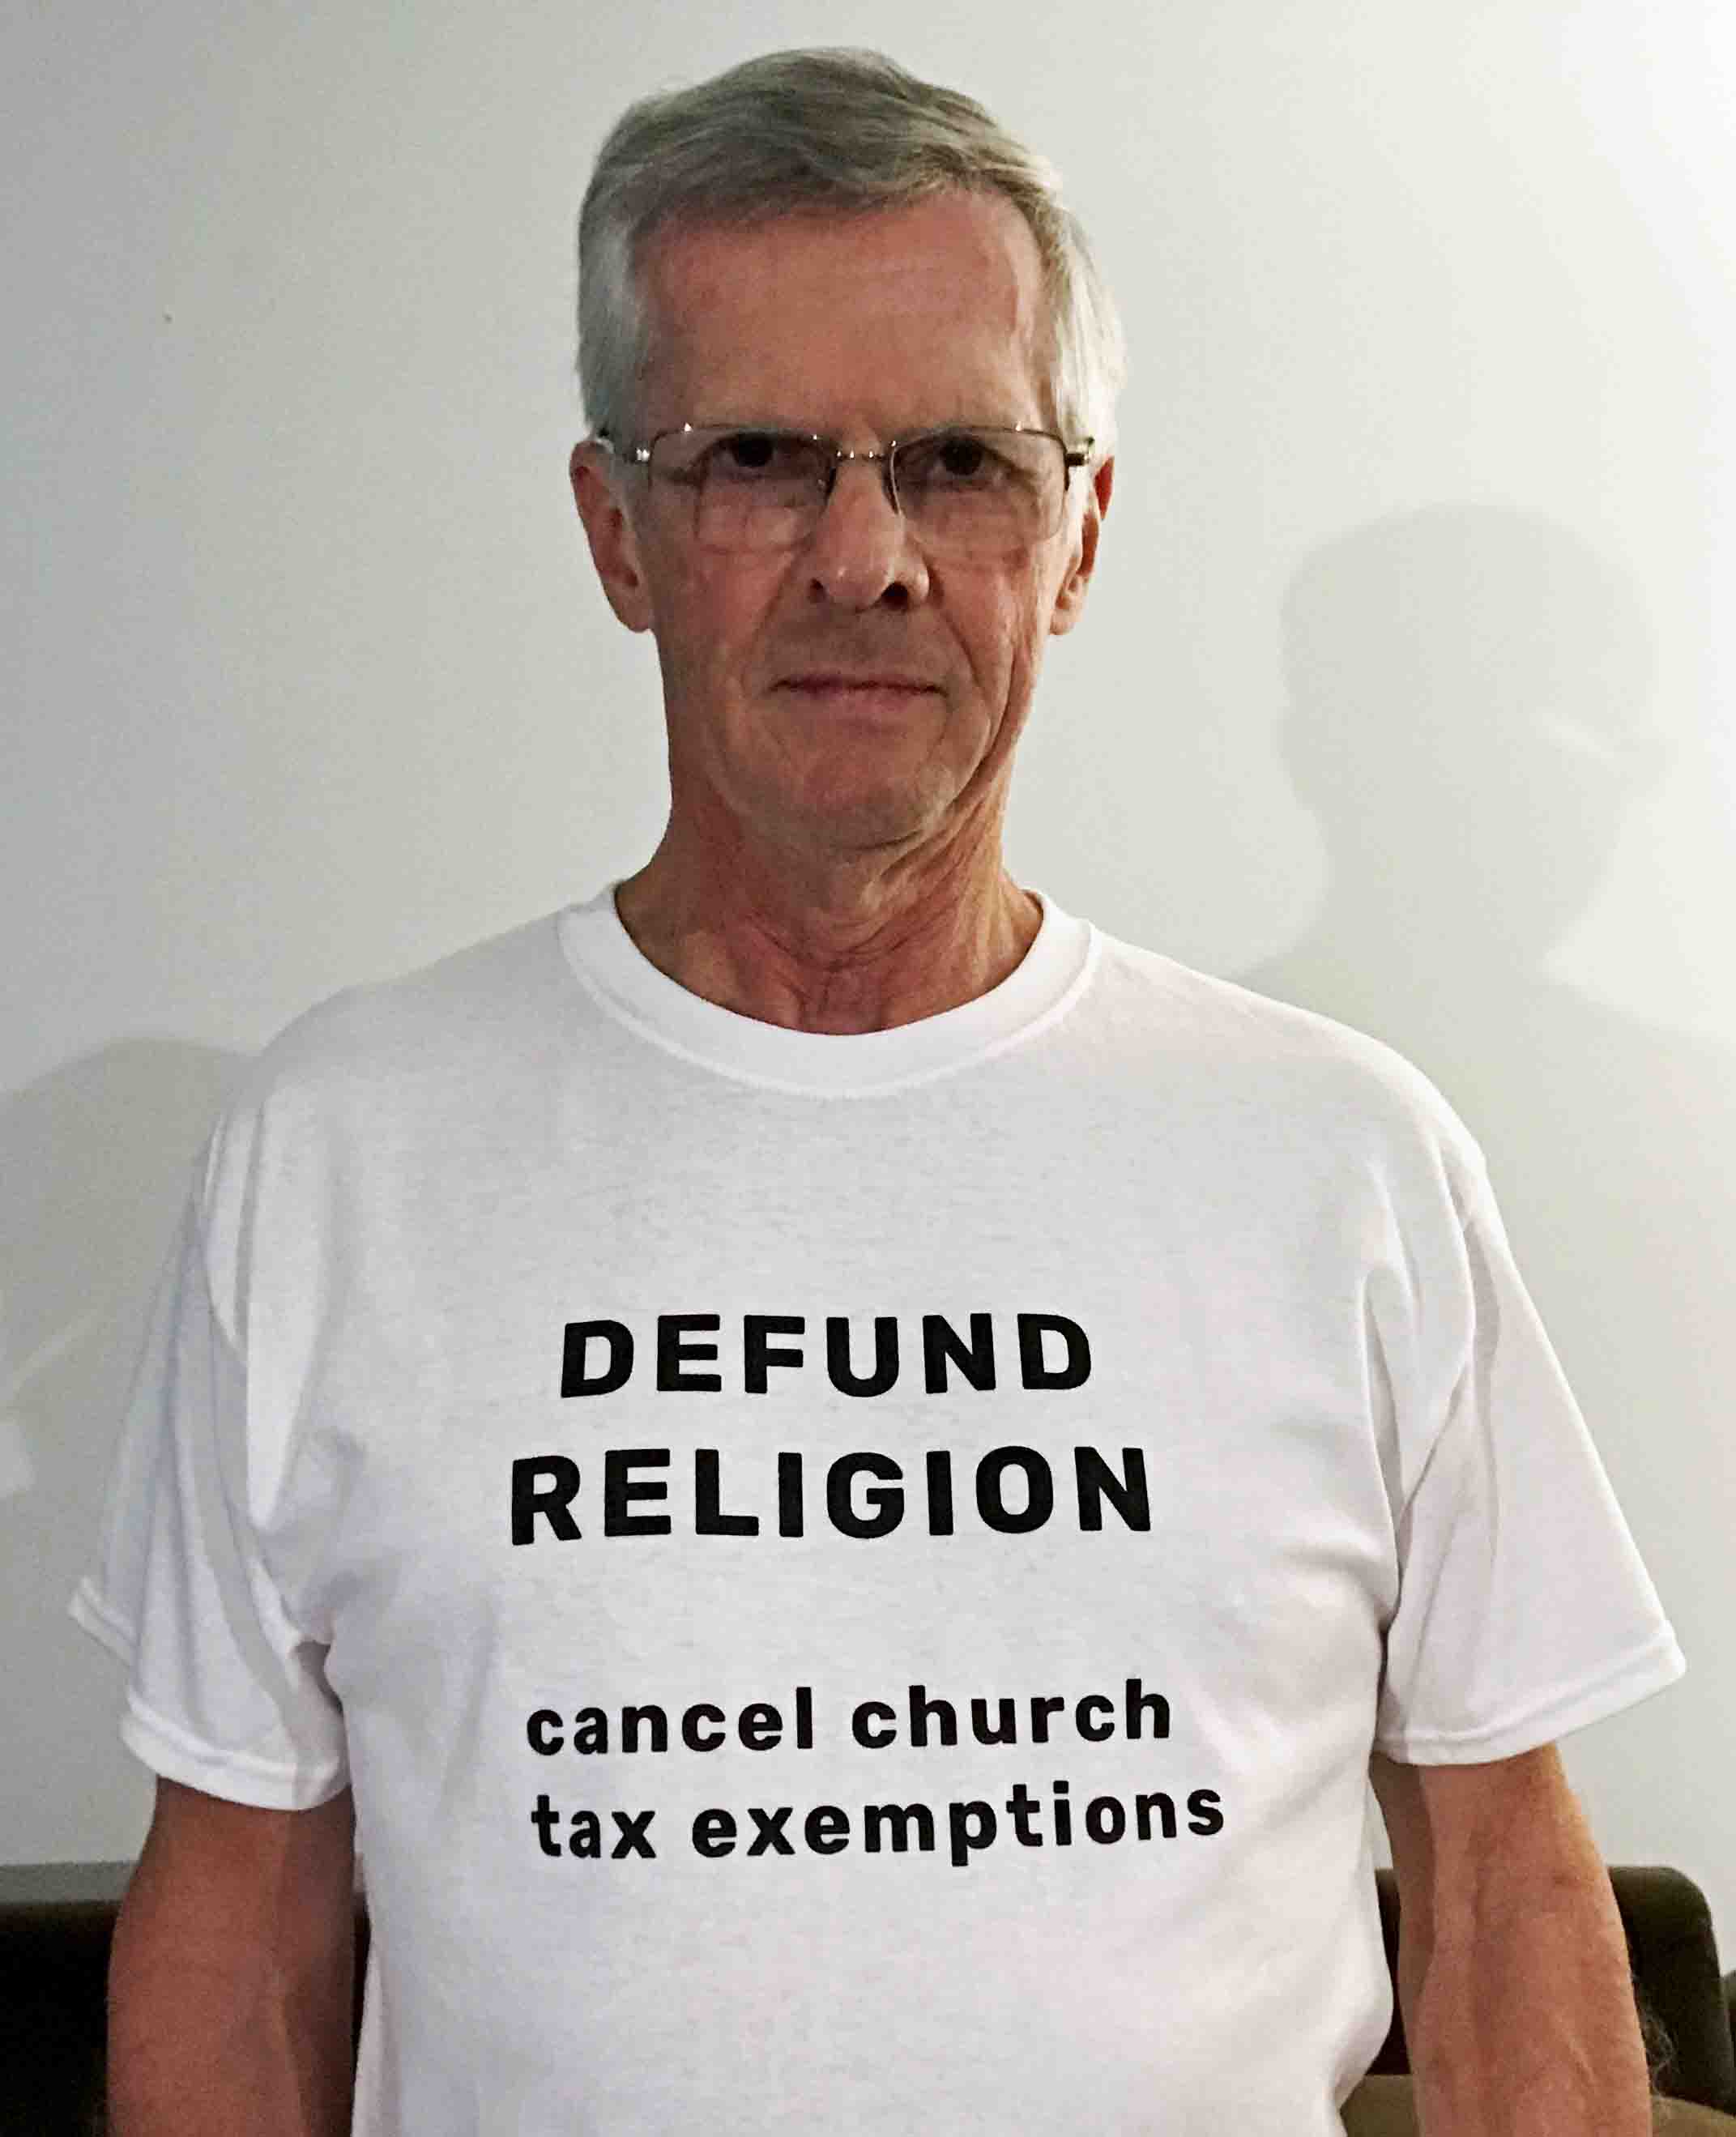 wearing a T-shirt that says Defund Religion, cancel church tax exemptions